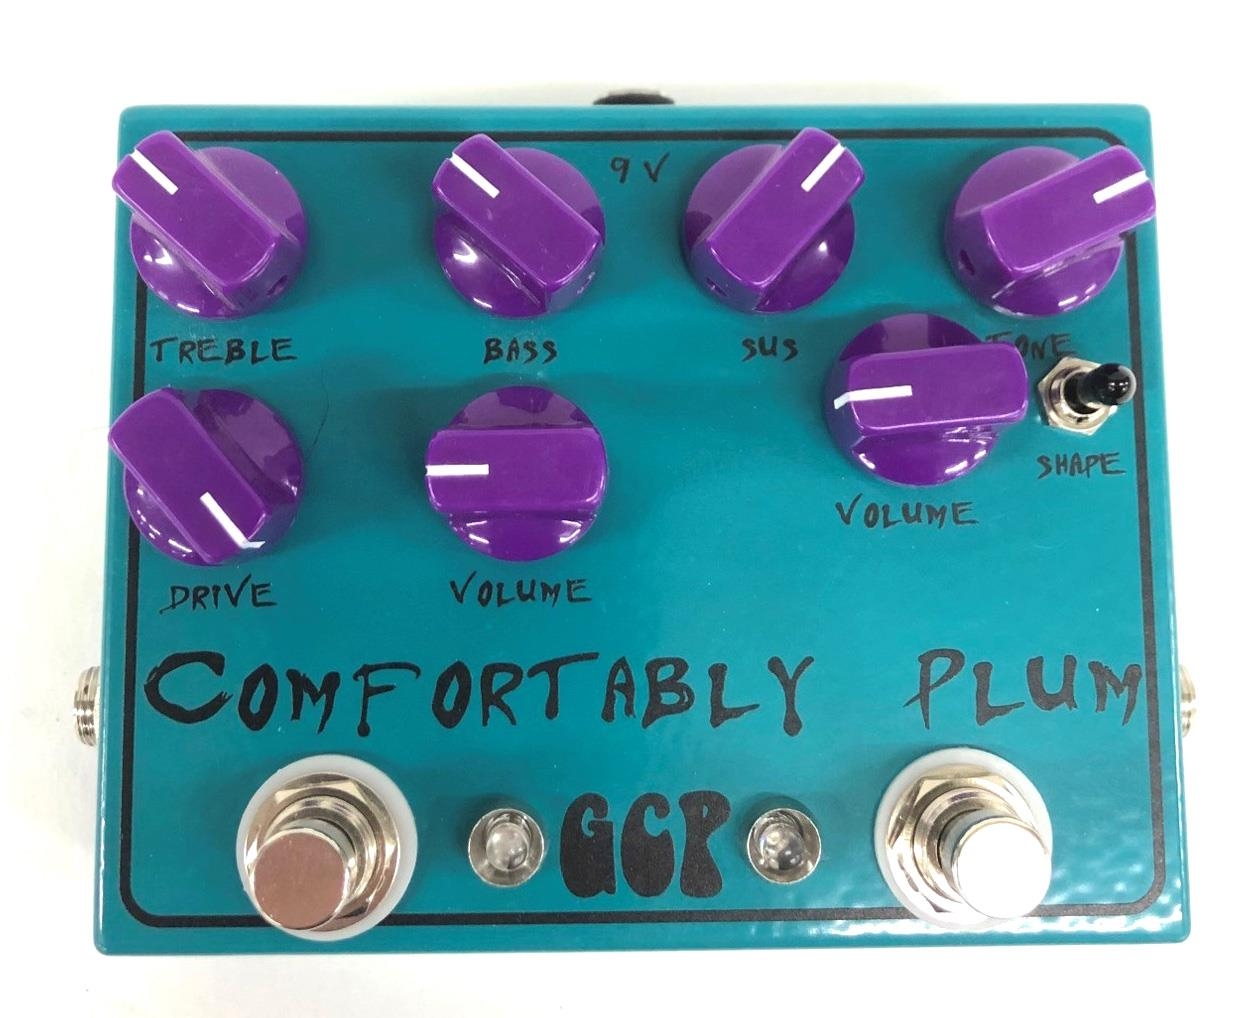 Green Carrot Pedals Comfortably Plum guitar effects pedal - Image 2 of 2